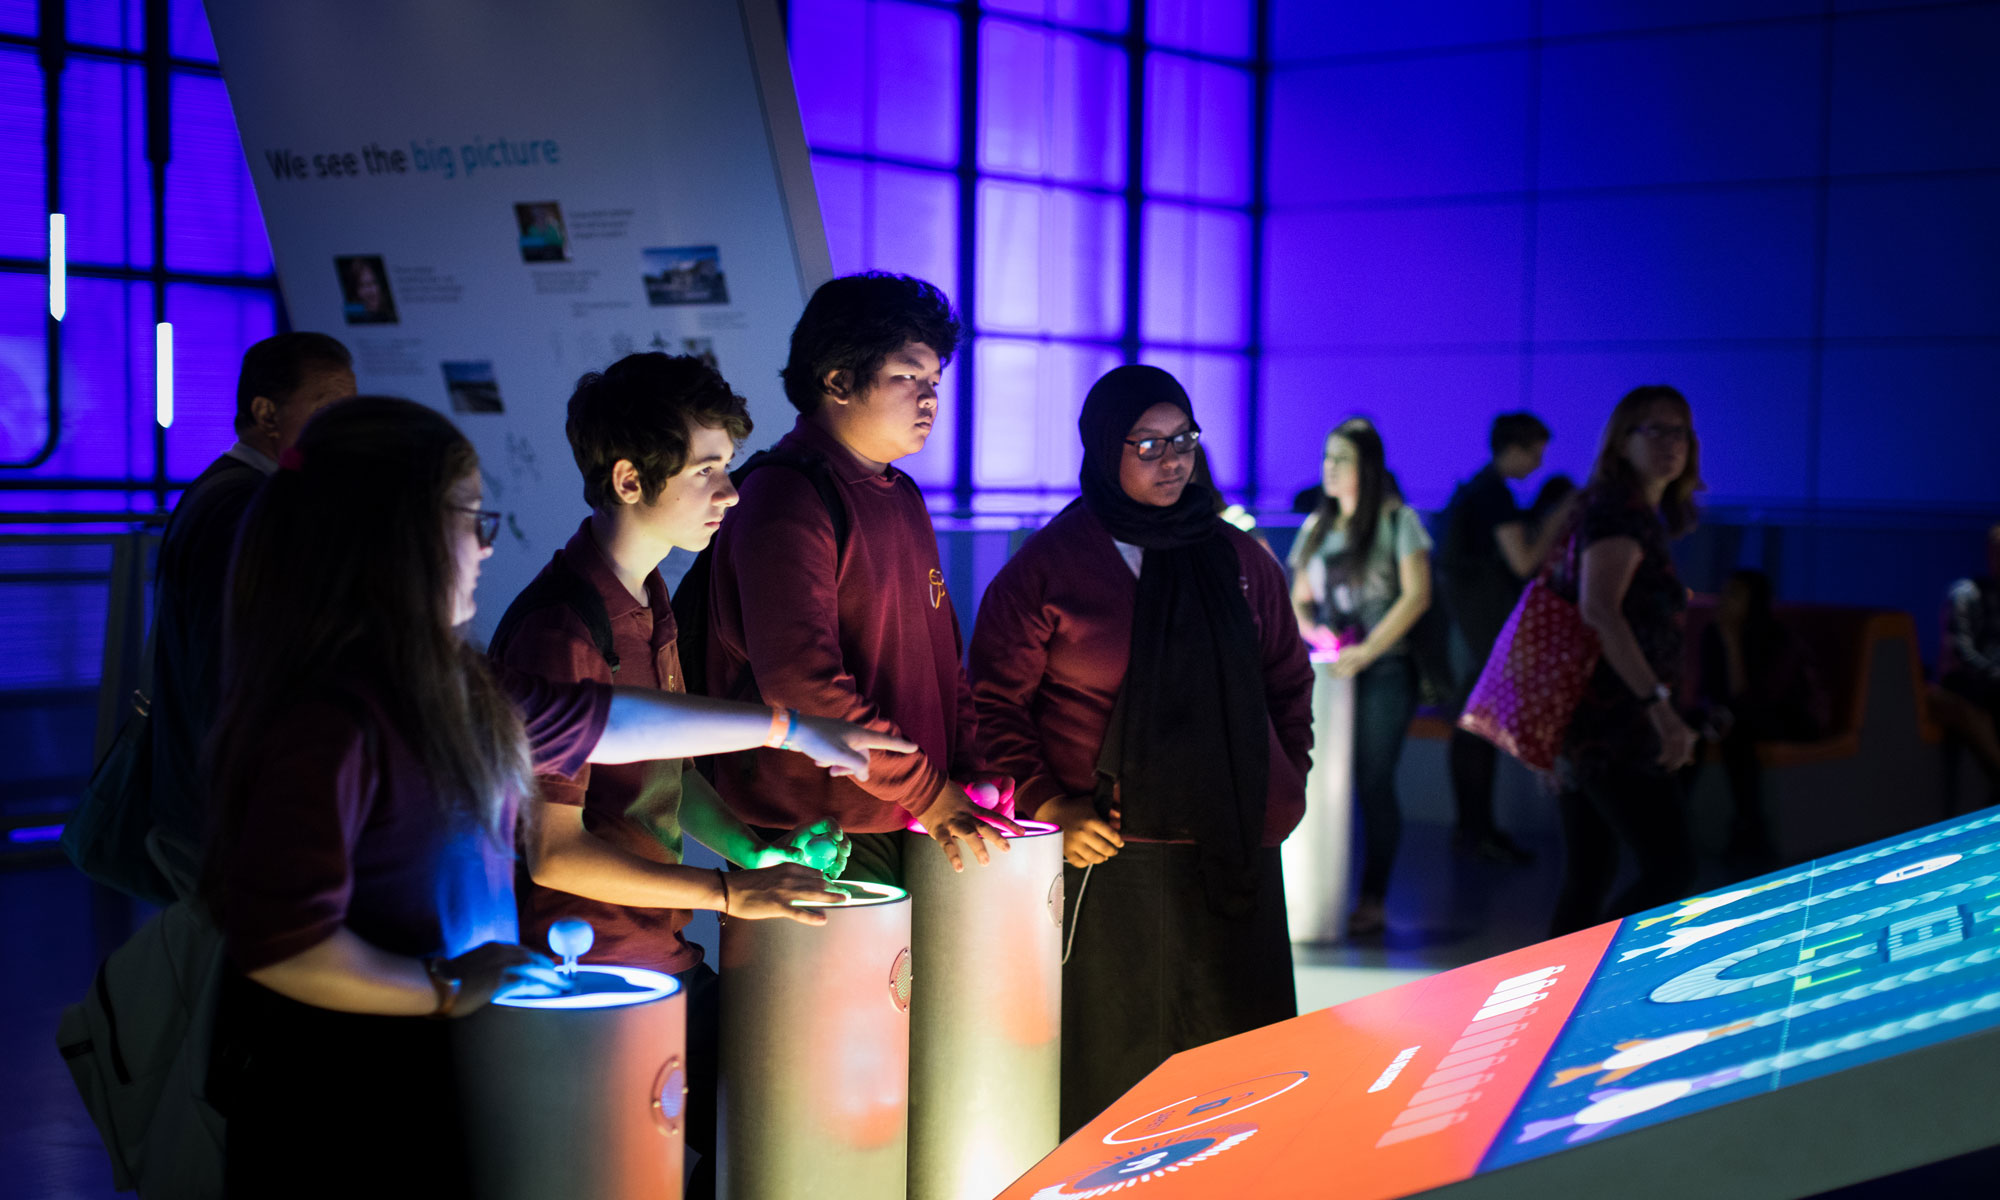 Students in the Engineer Your Future gallery at the Science Museum, London